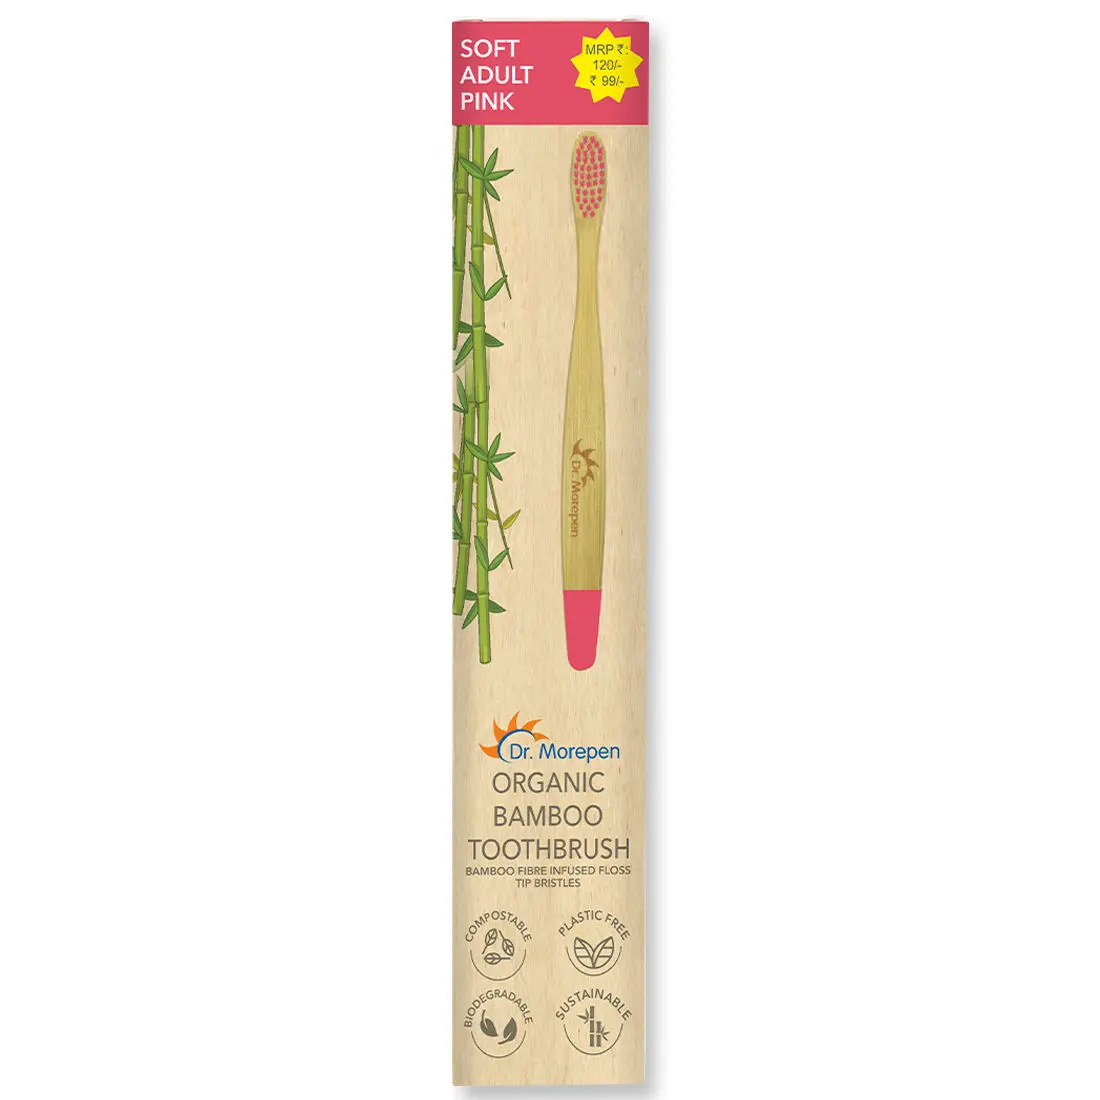 DR. MOREPEN Organic Bamboo Toothbrush For Adults - Pink